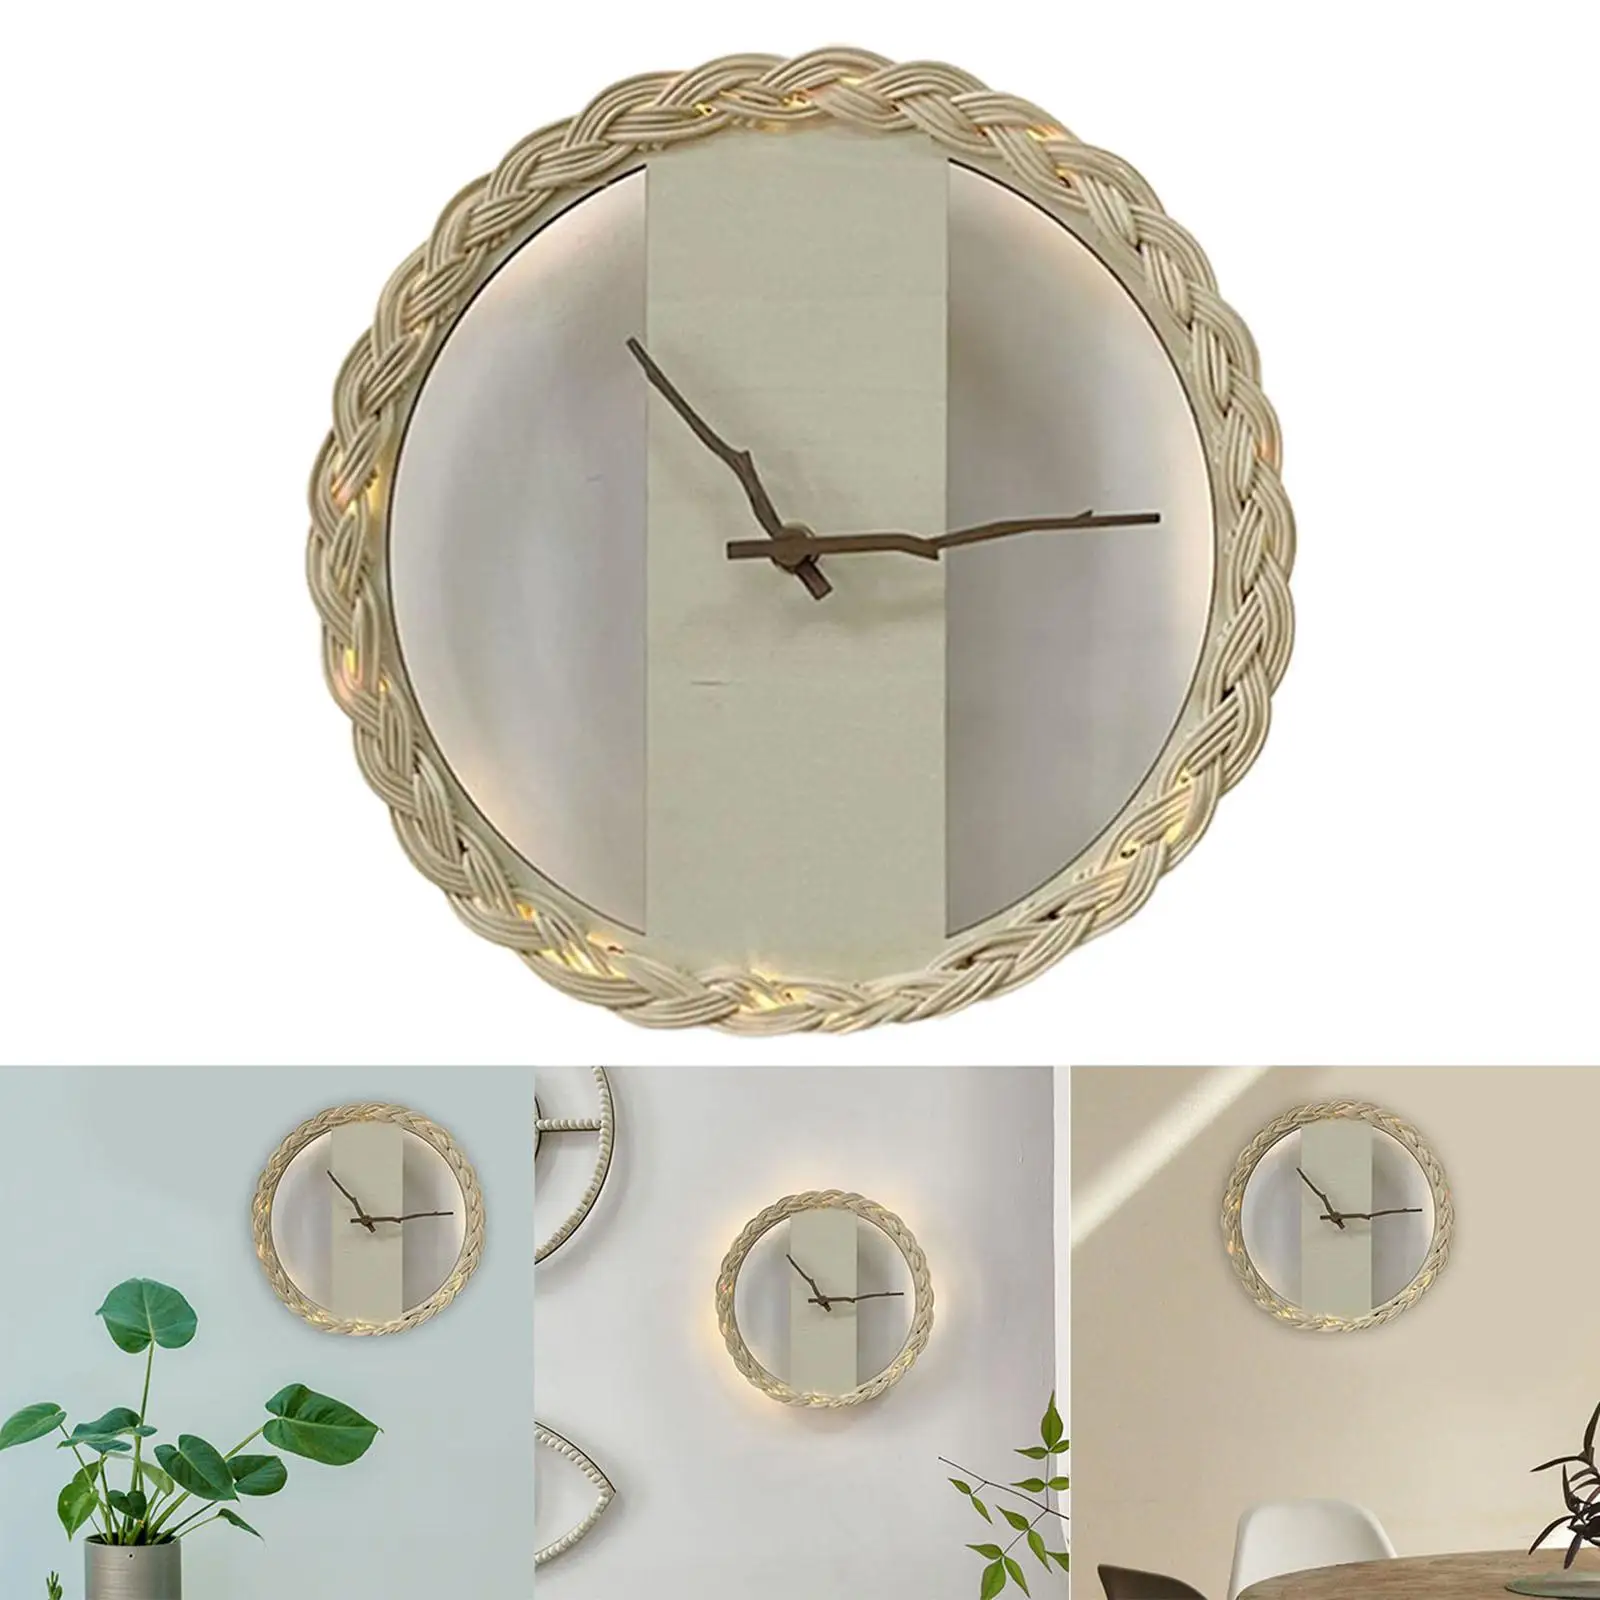 Round Rustic Woven Clock Quiet Wooden Durable Wooden Woven Round Boho Clock for Office Bathroom Restaurant Home Decoration